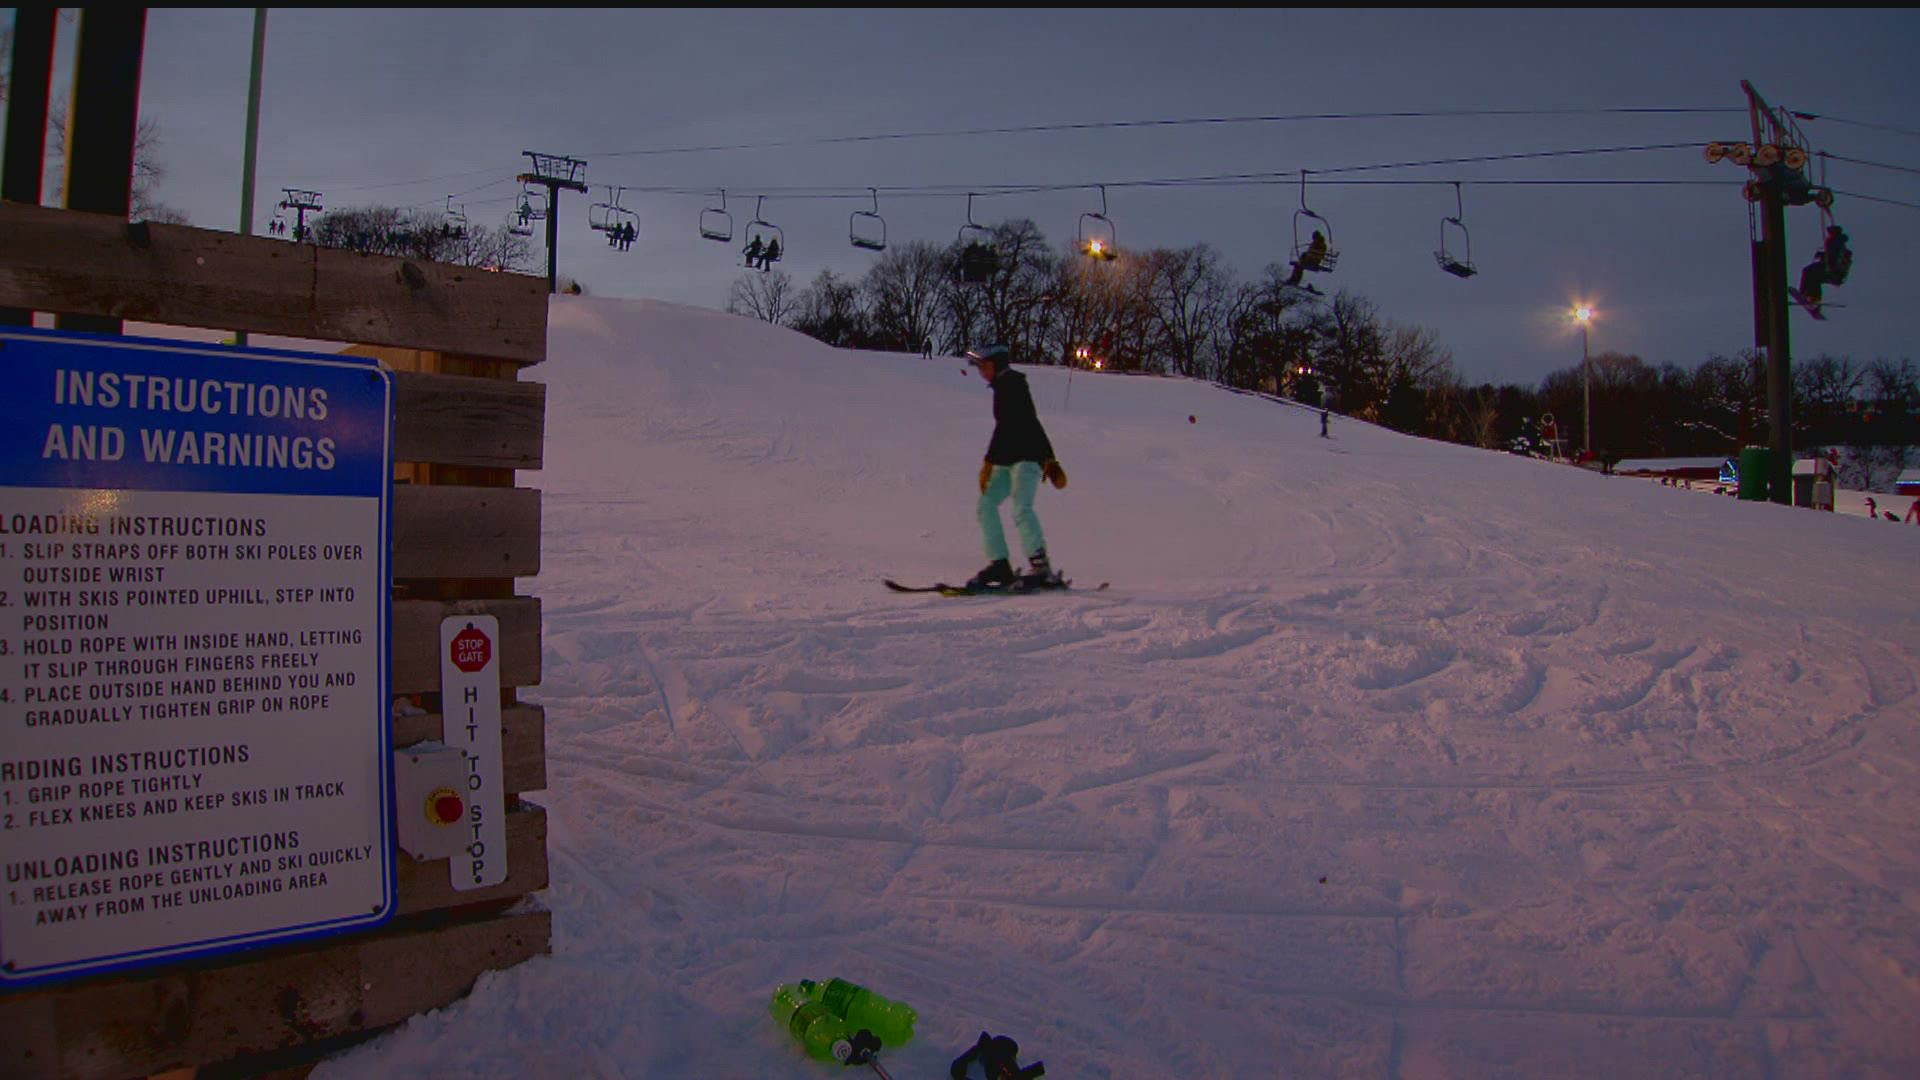 With temps in the 30s, winter activities will be in high demand this week.